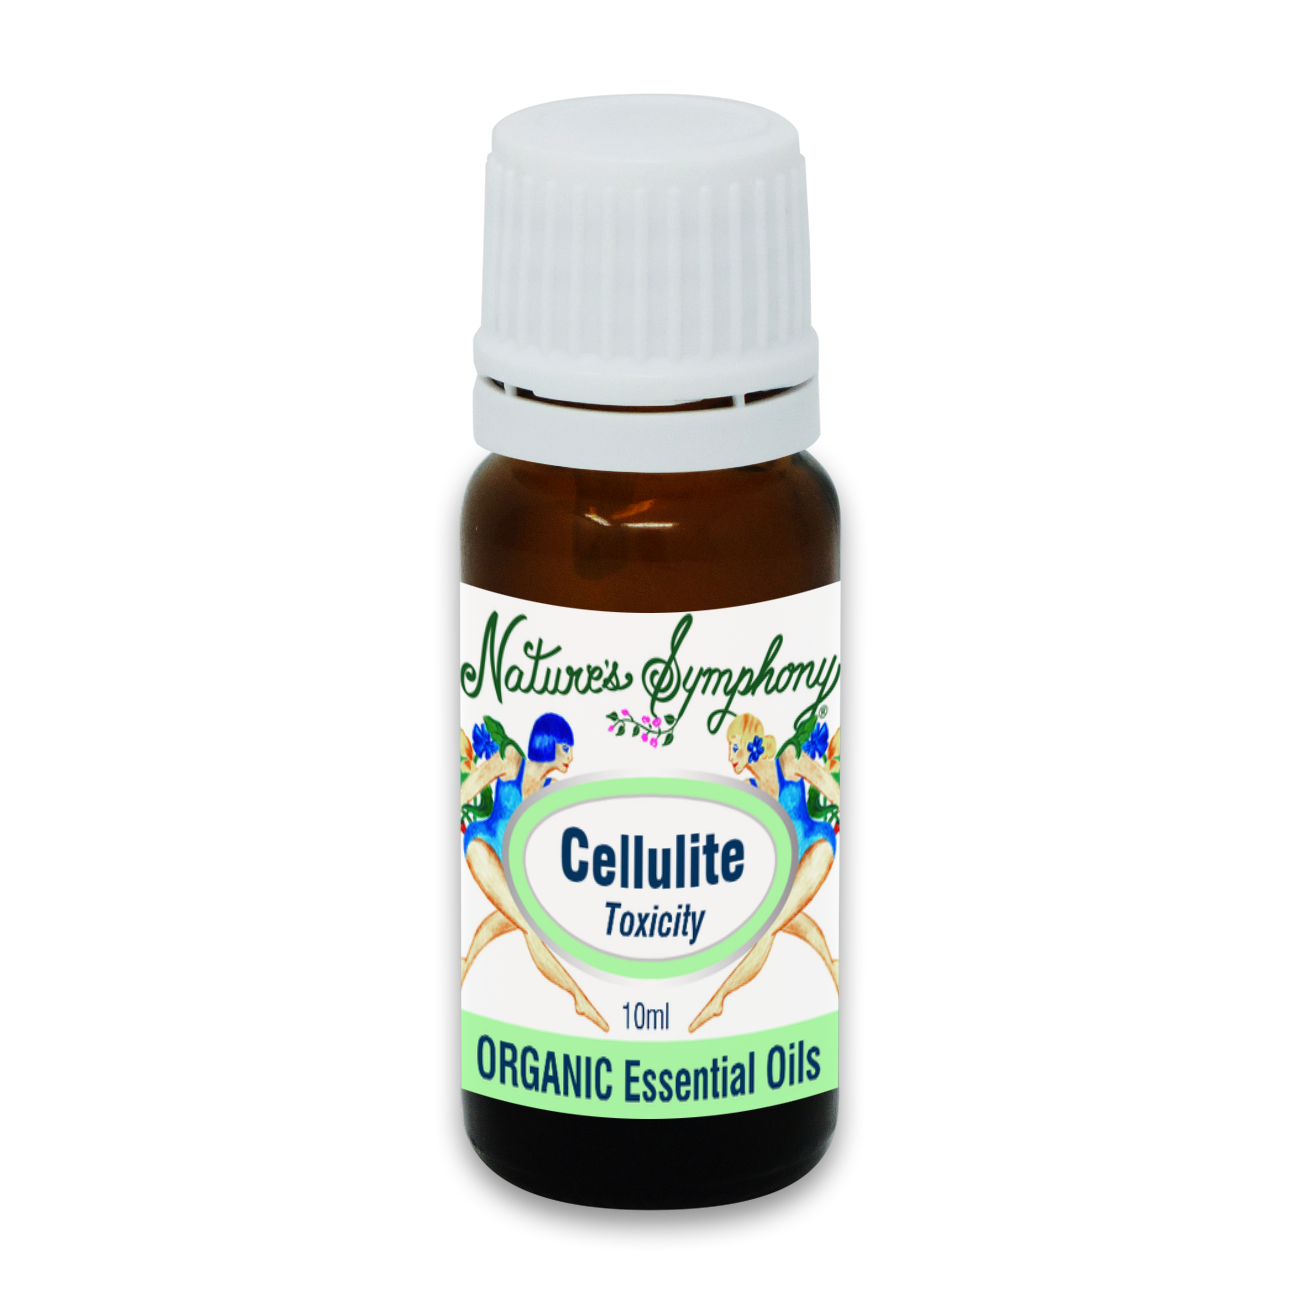 Cellulite/Toxicity, Organic/Wildcrafted blend - 10ml